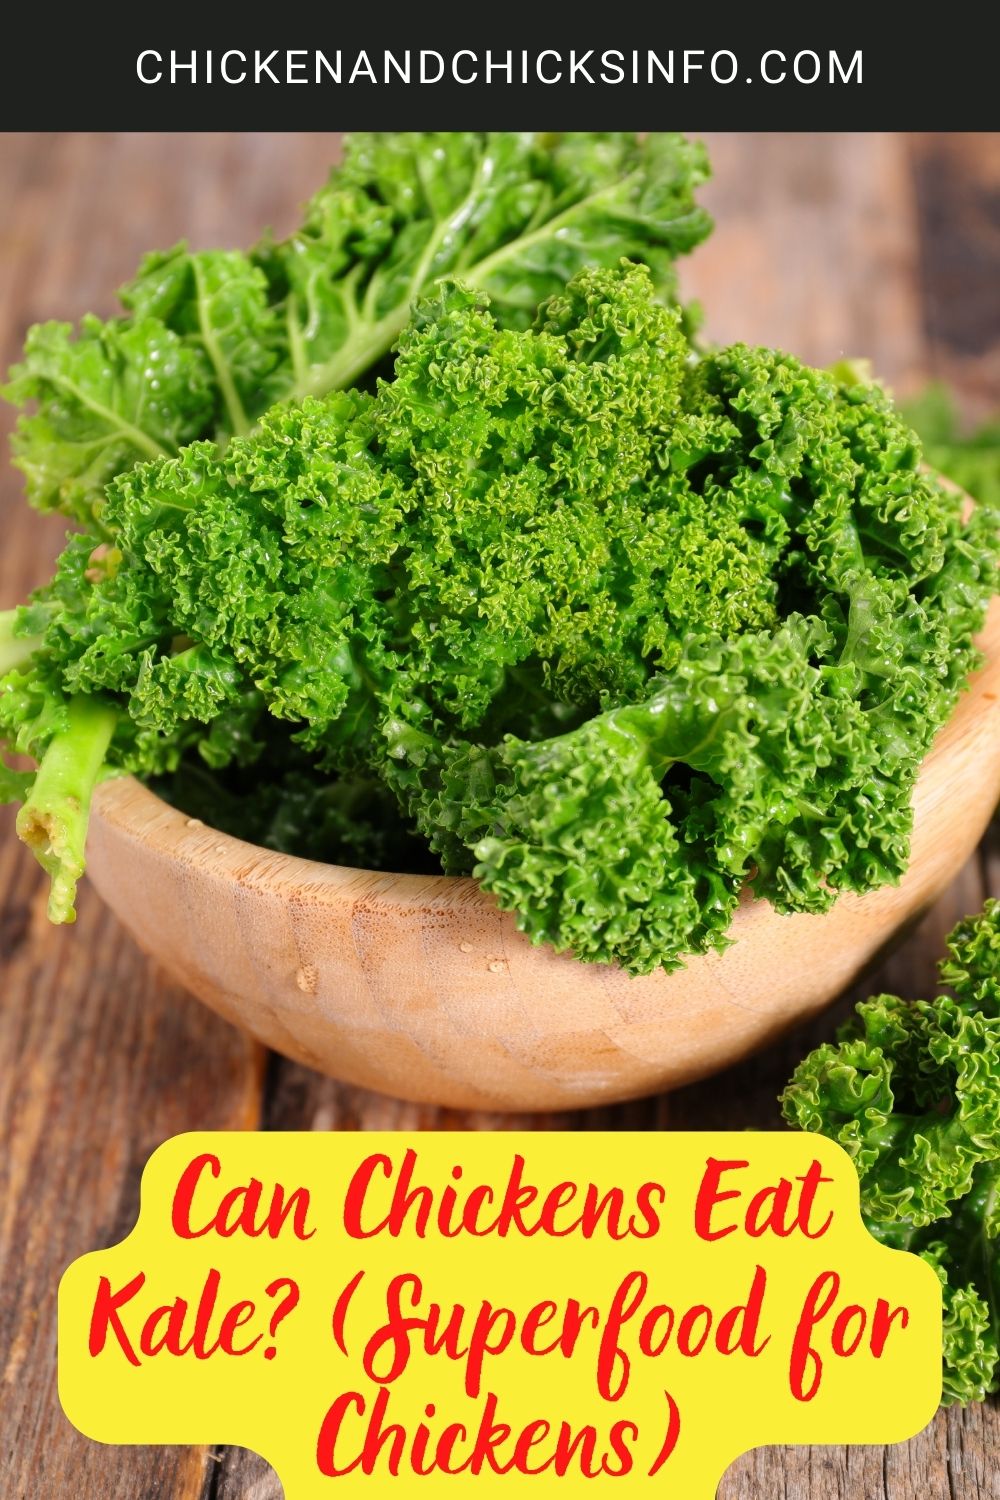 Can Chickens Eat Kale? (Superfood for Chickens) poster.
